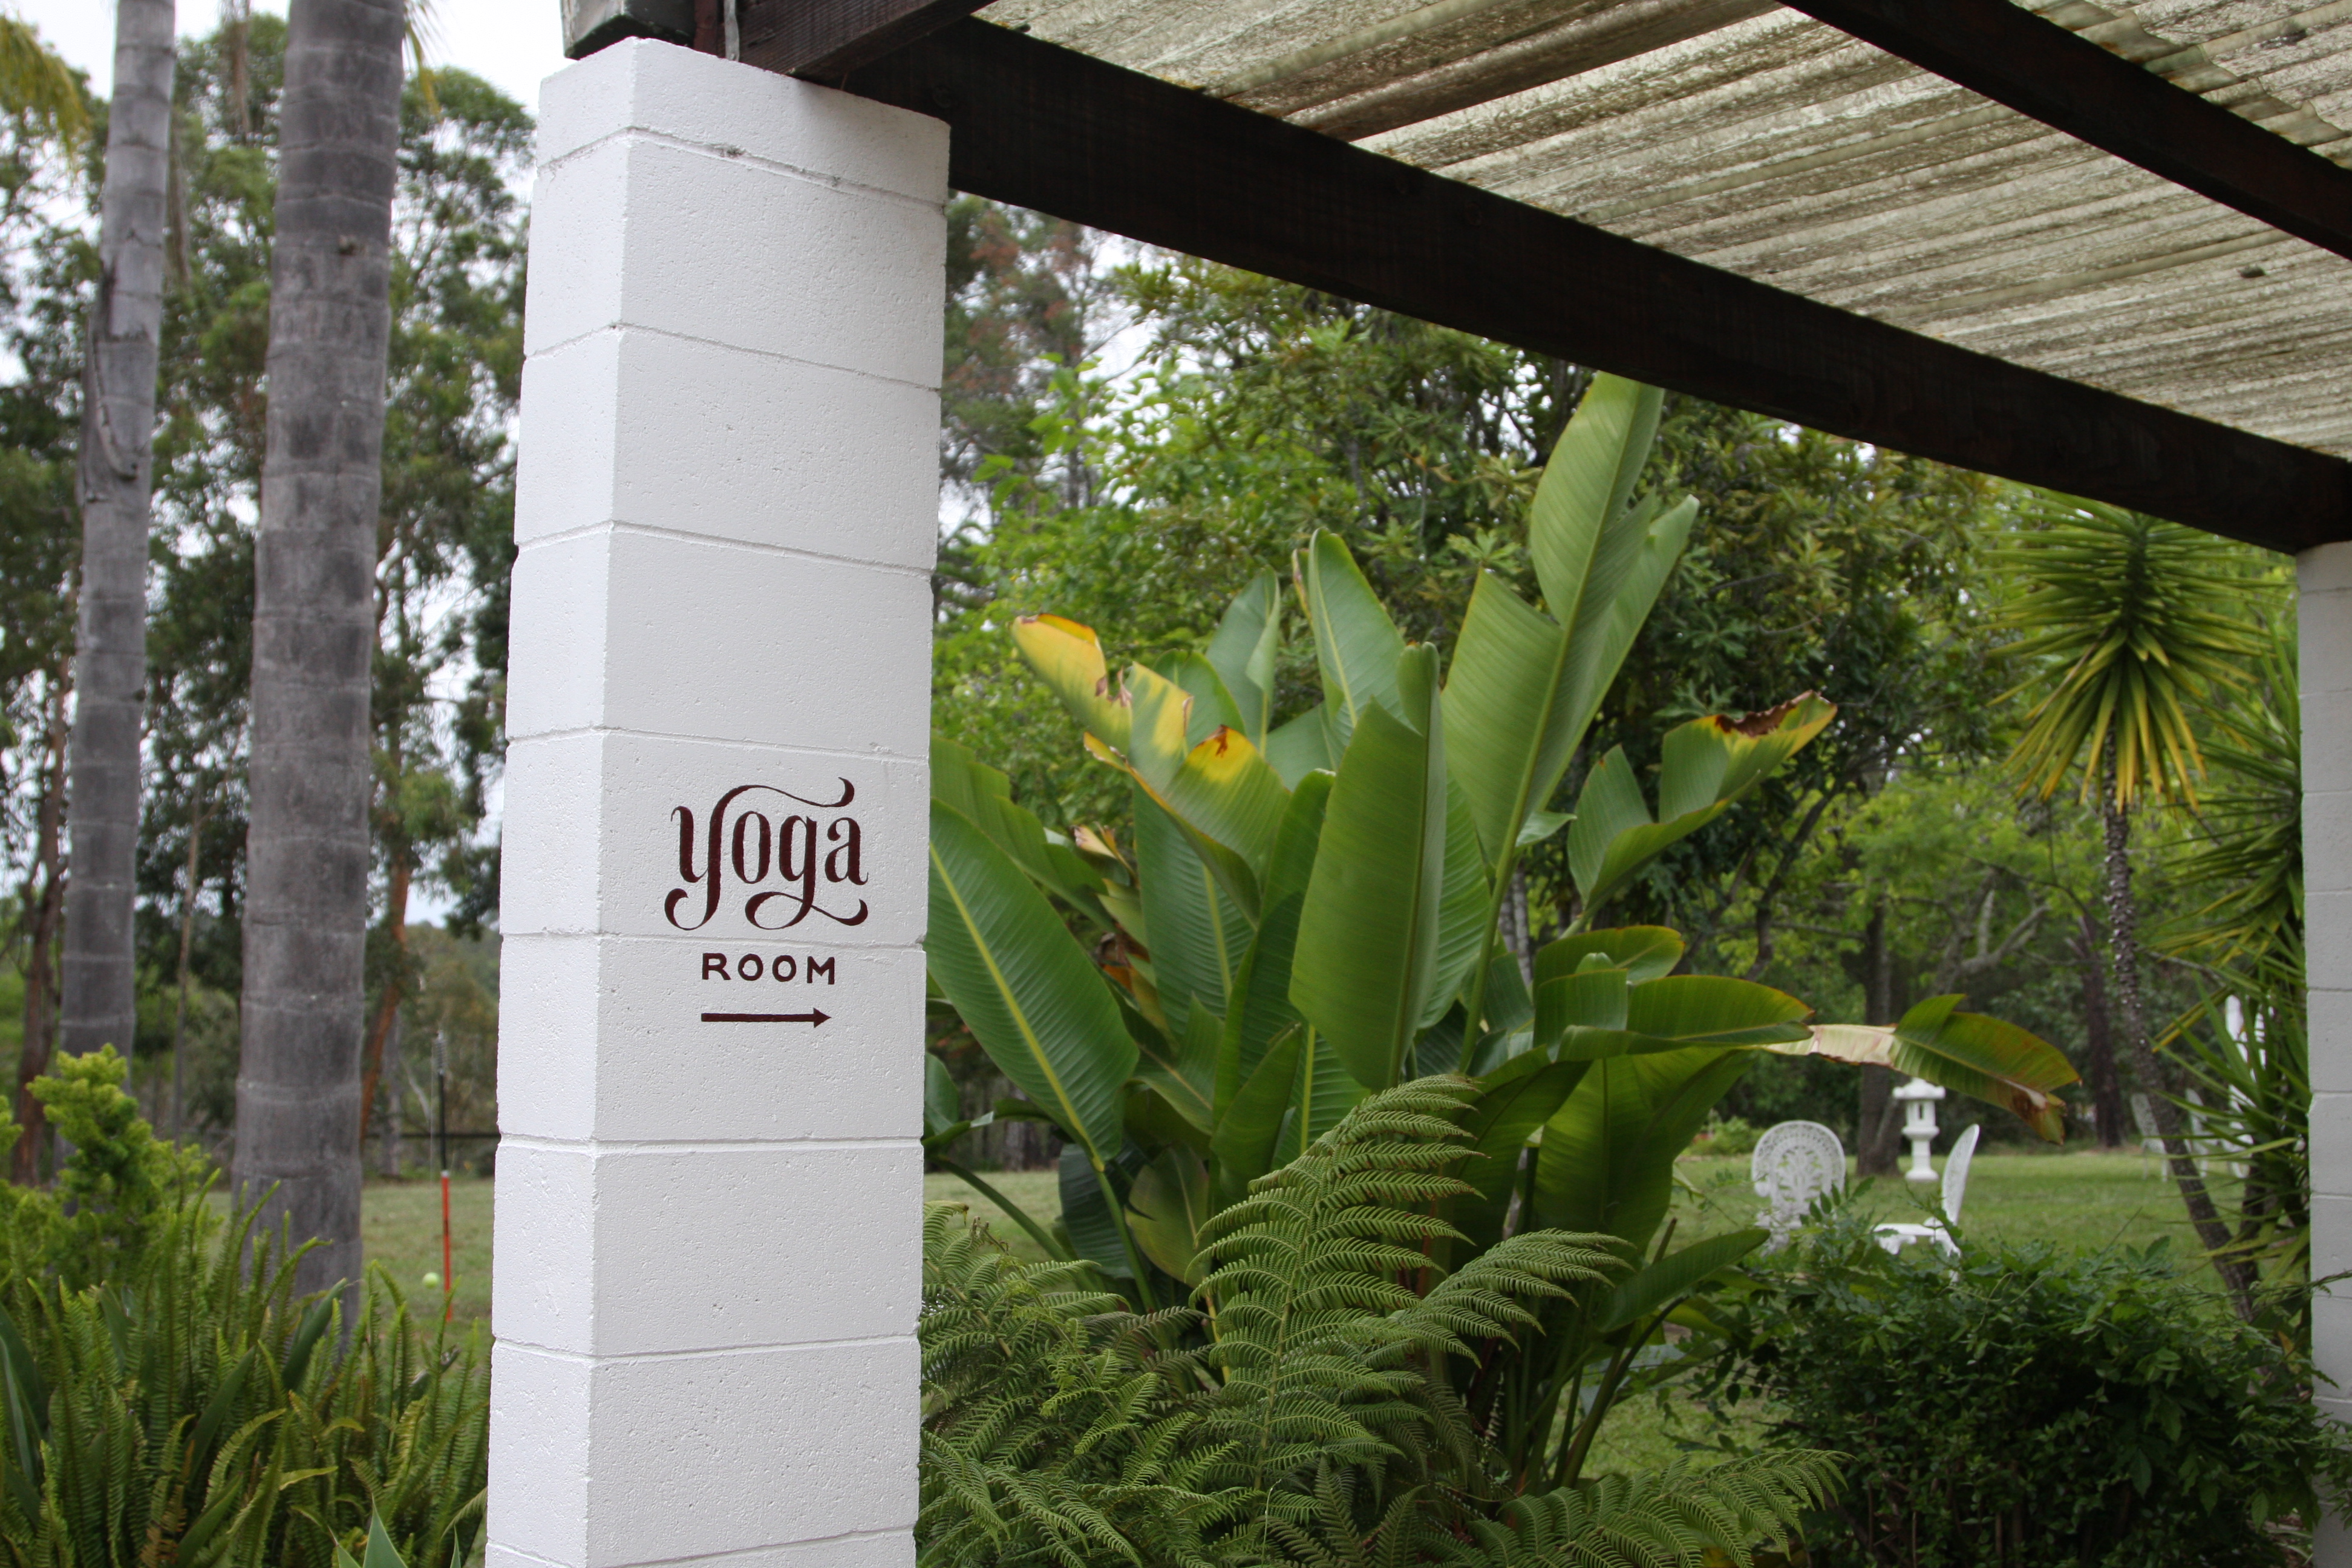 Swami’s Yoga Retreat – A Review of My Stay